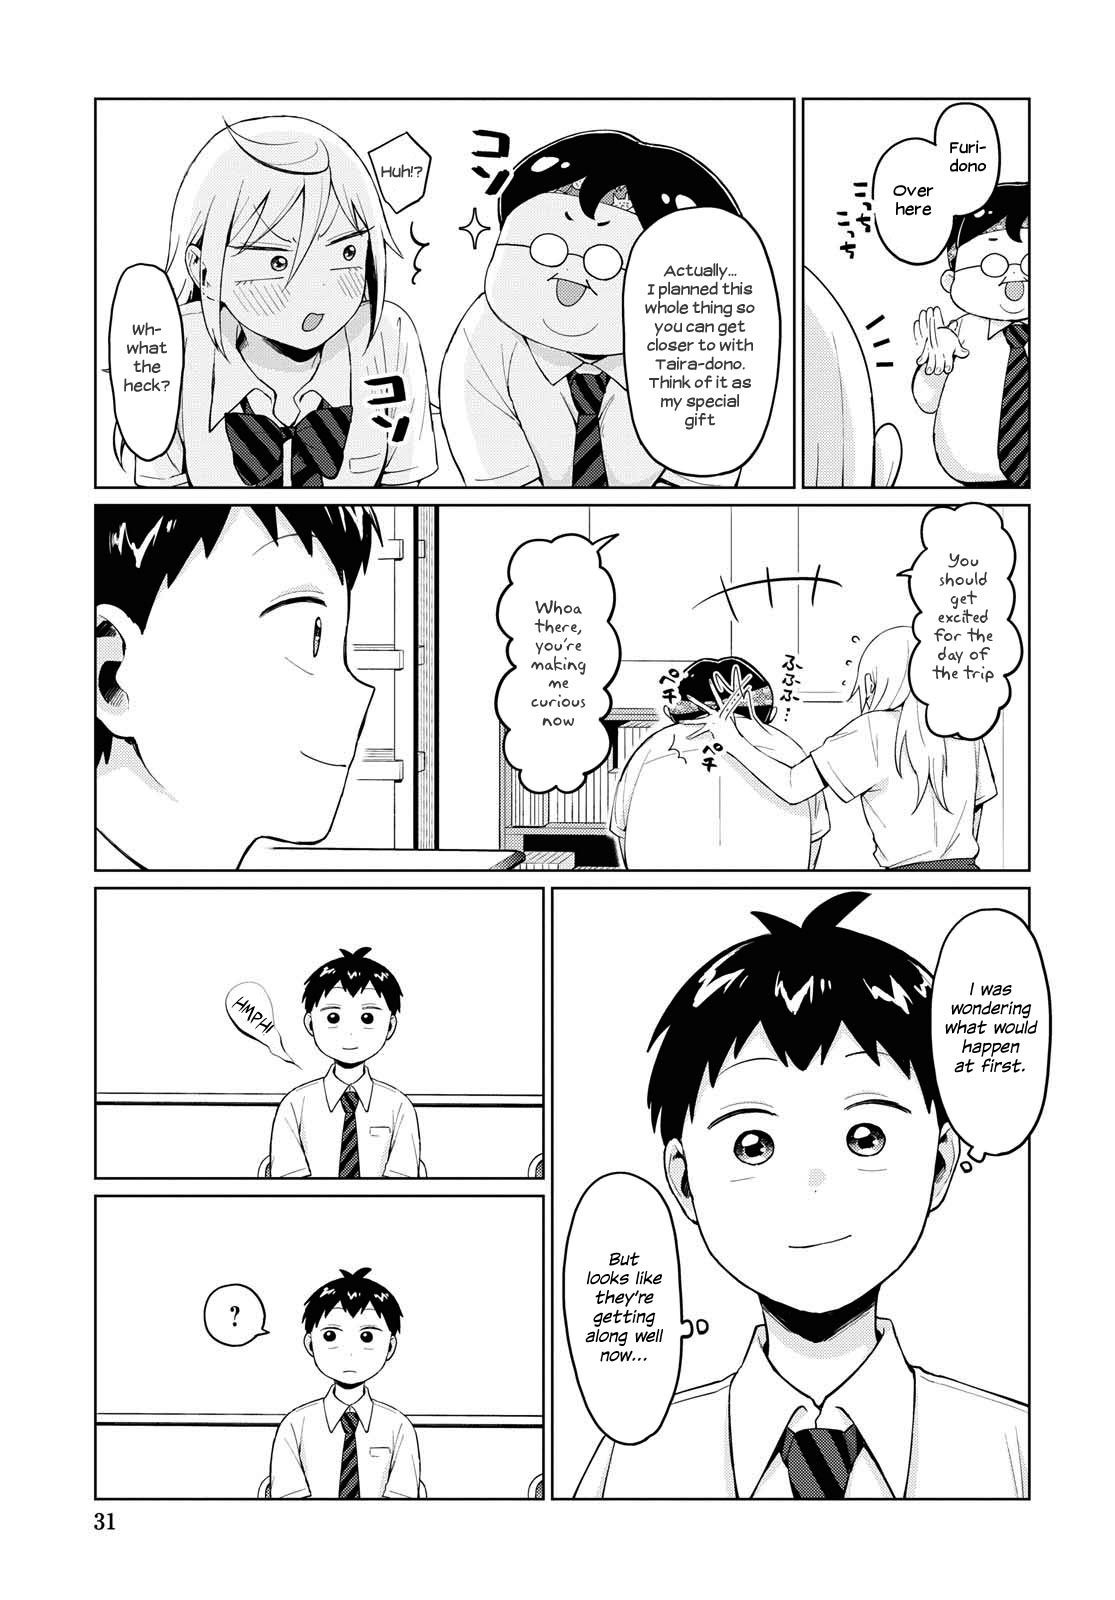 No Matter What You Say, Furi-san is Scary. - chapter 13 - #5